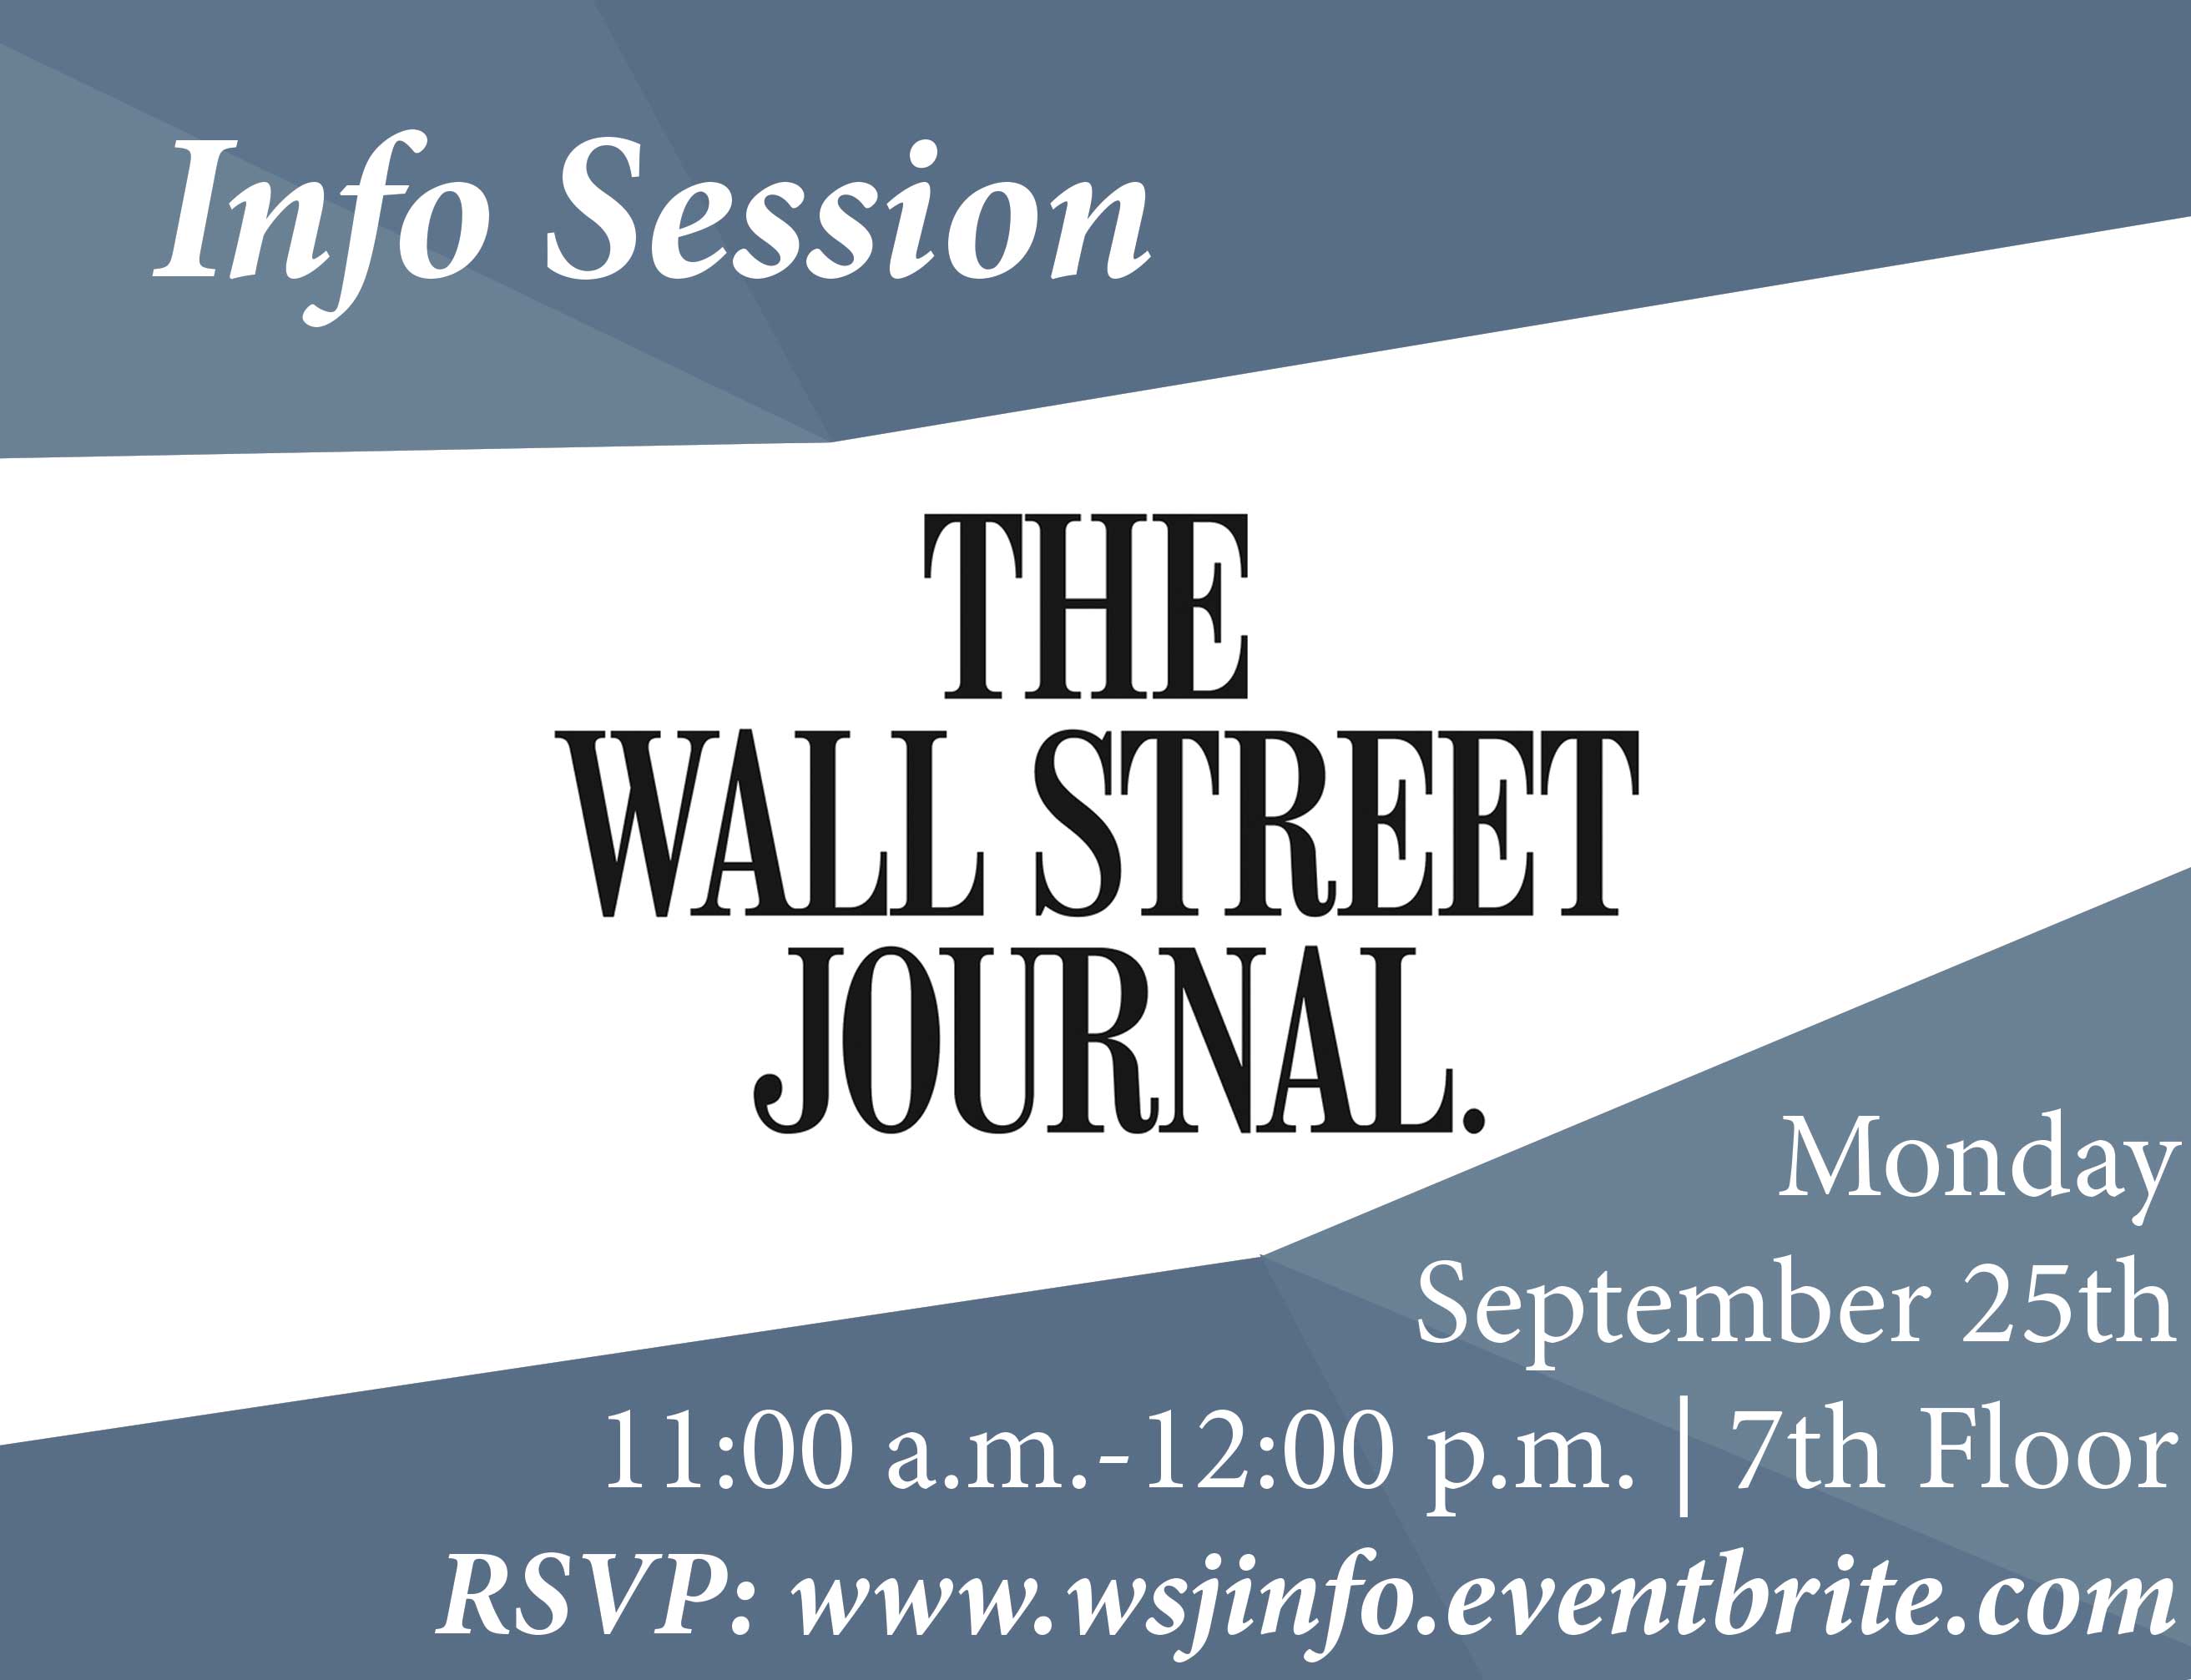 Info Session - The Wall Street Journal - September 25th 2017